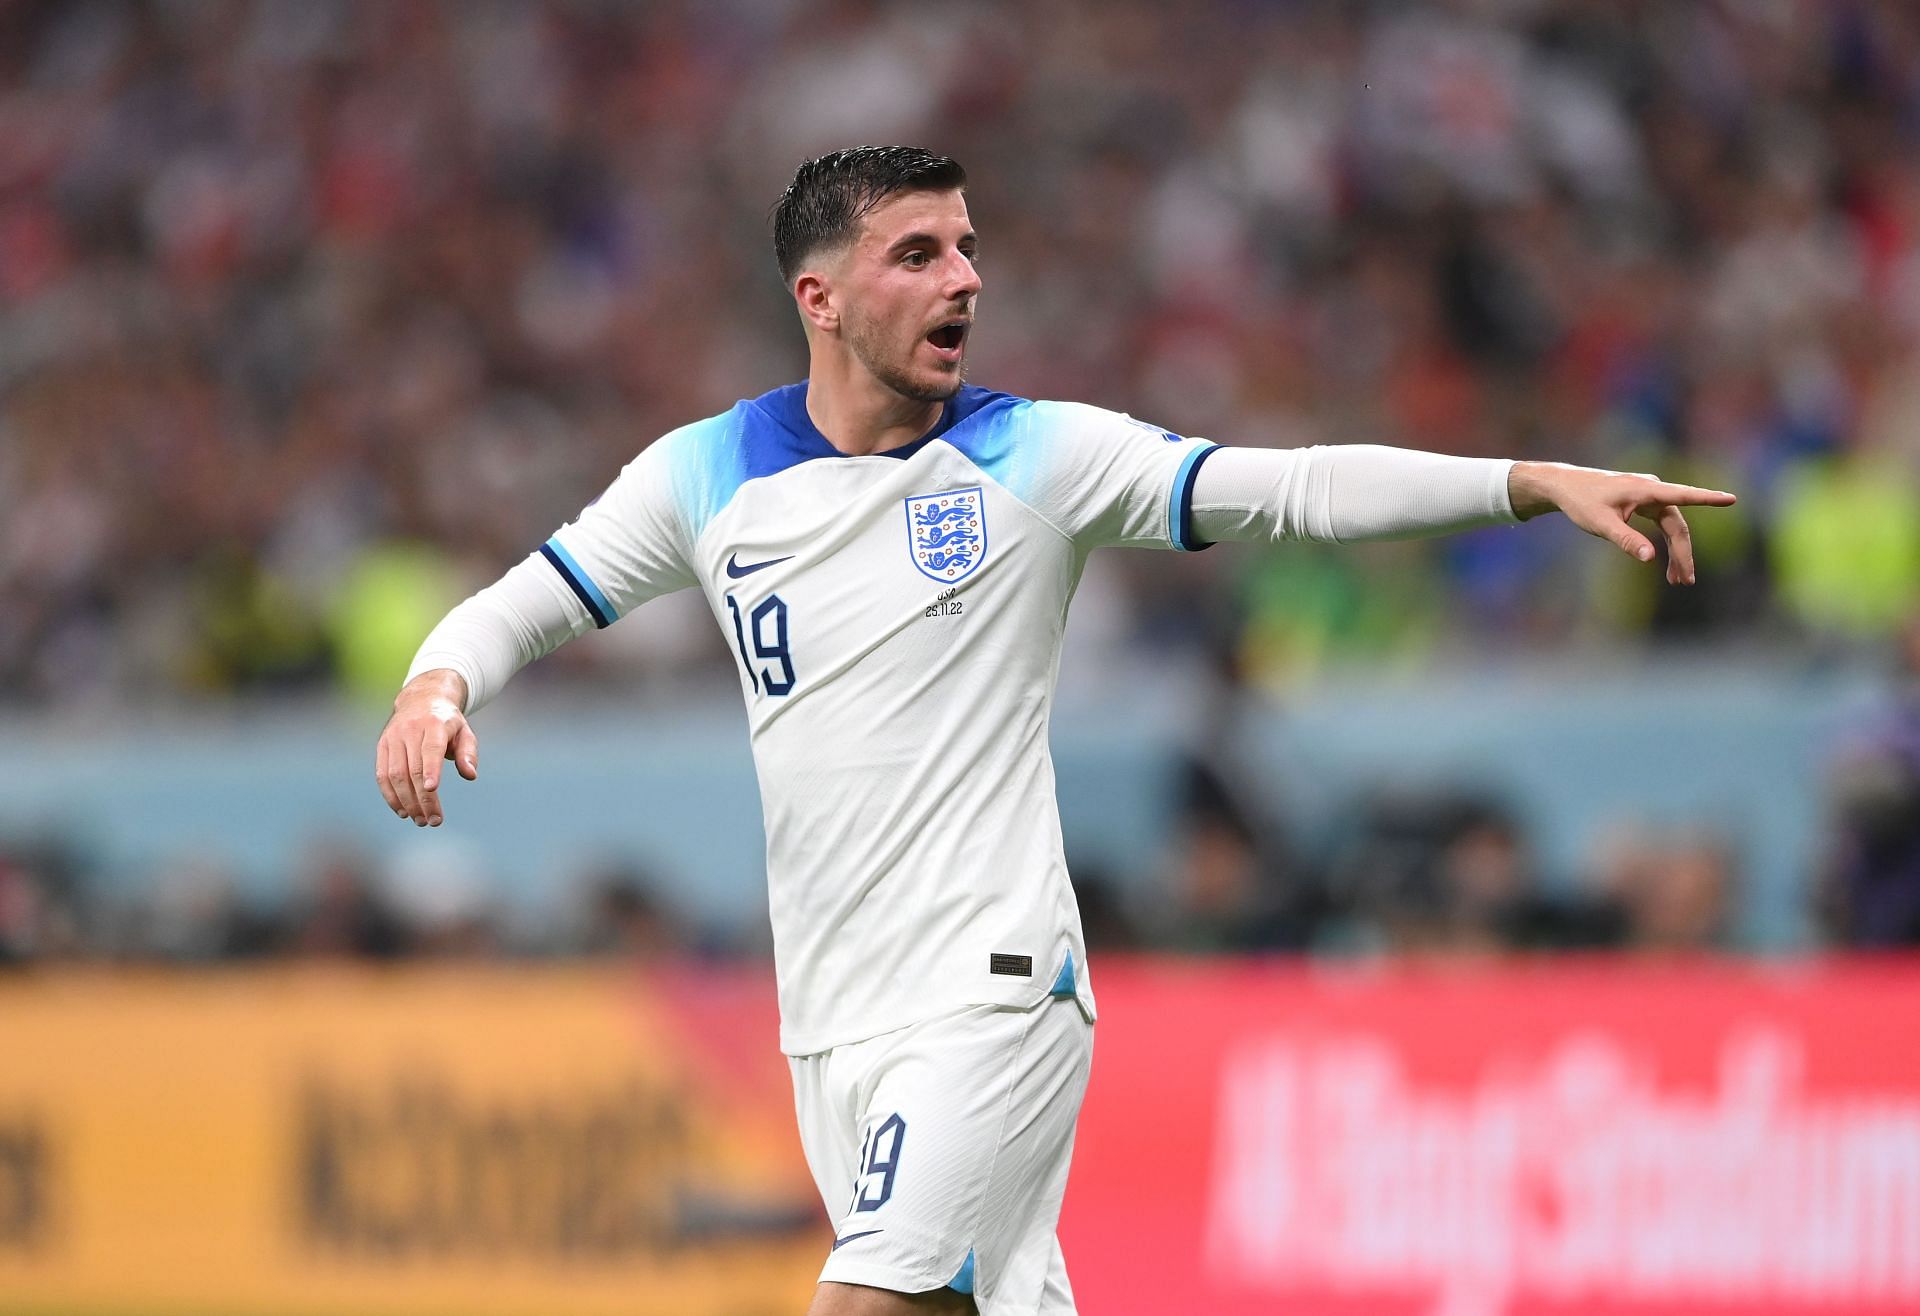 Mason Mount is currently with the England team at the 2022 FIFA World Cup.